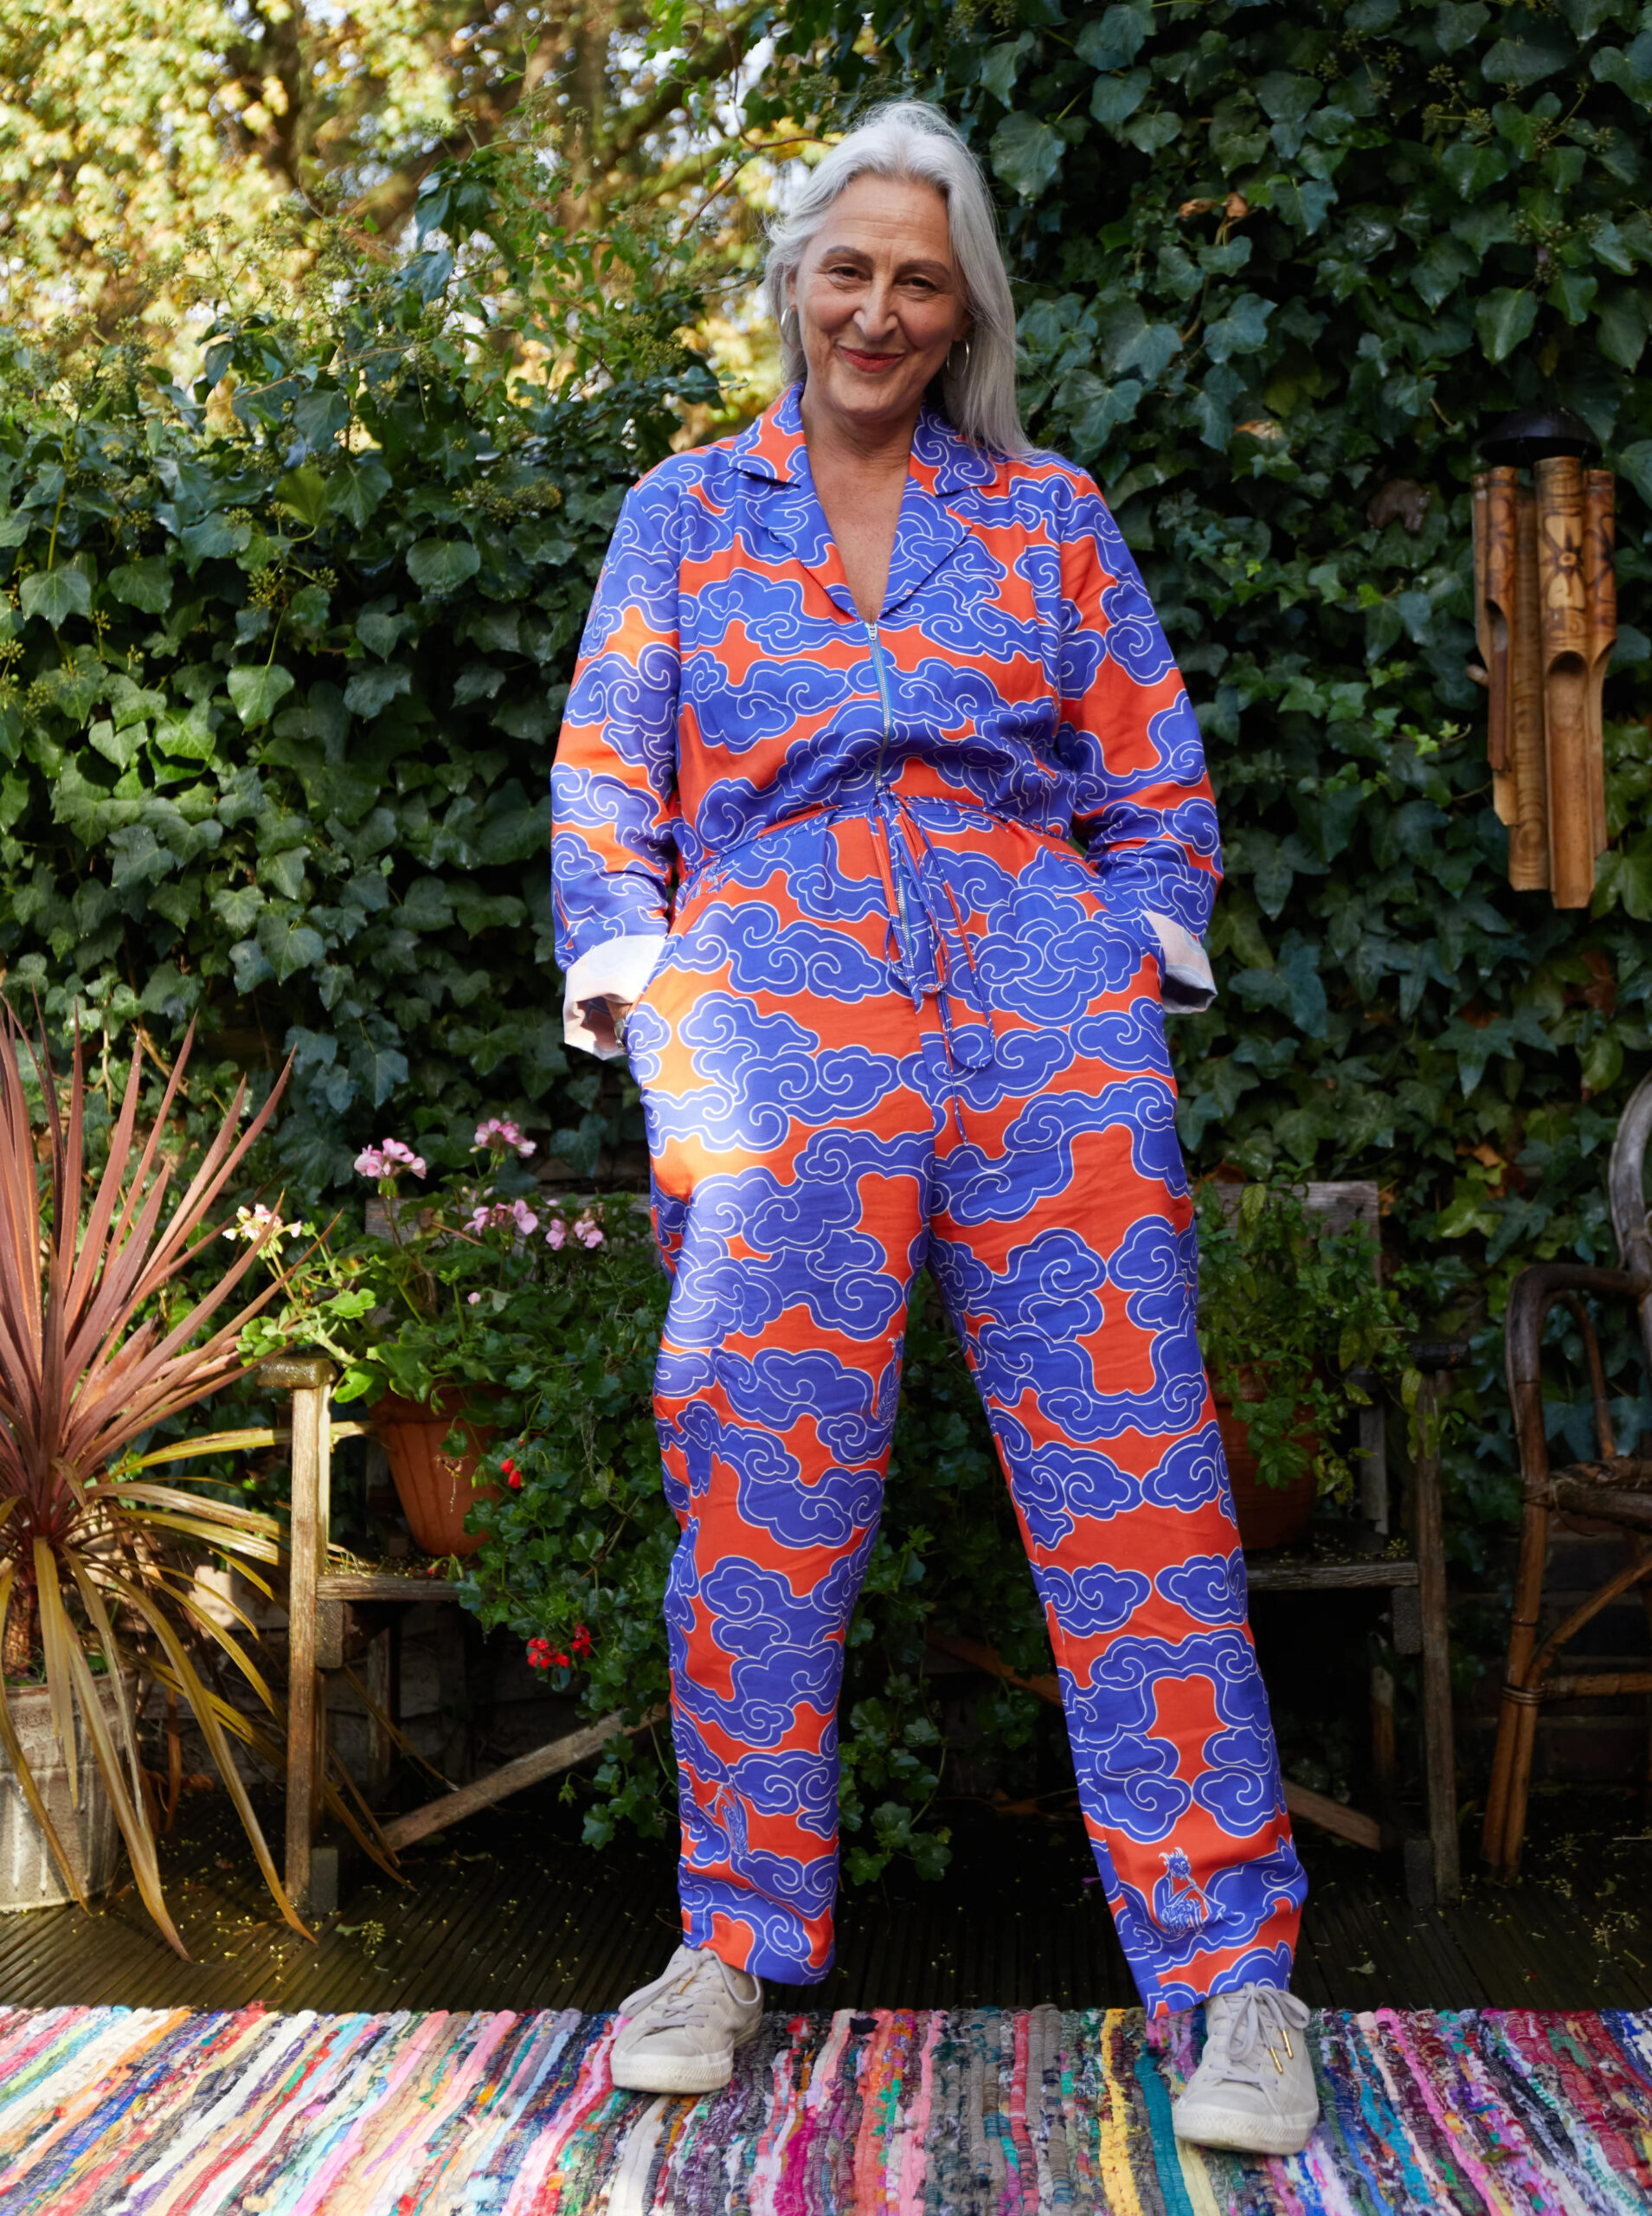 The Frankie Shop Linda made me change my mind about jumpsuits